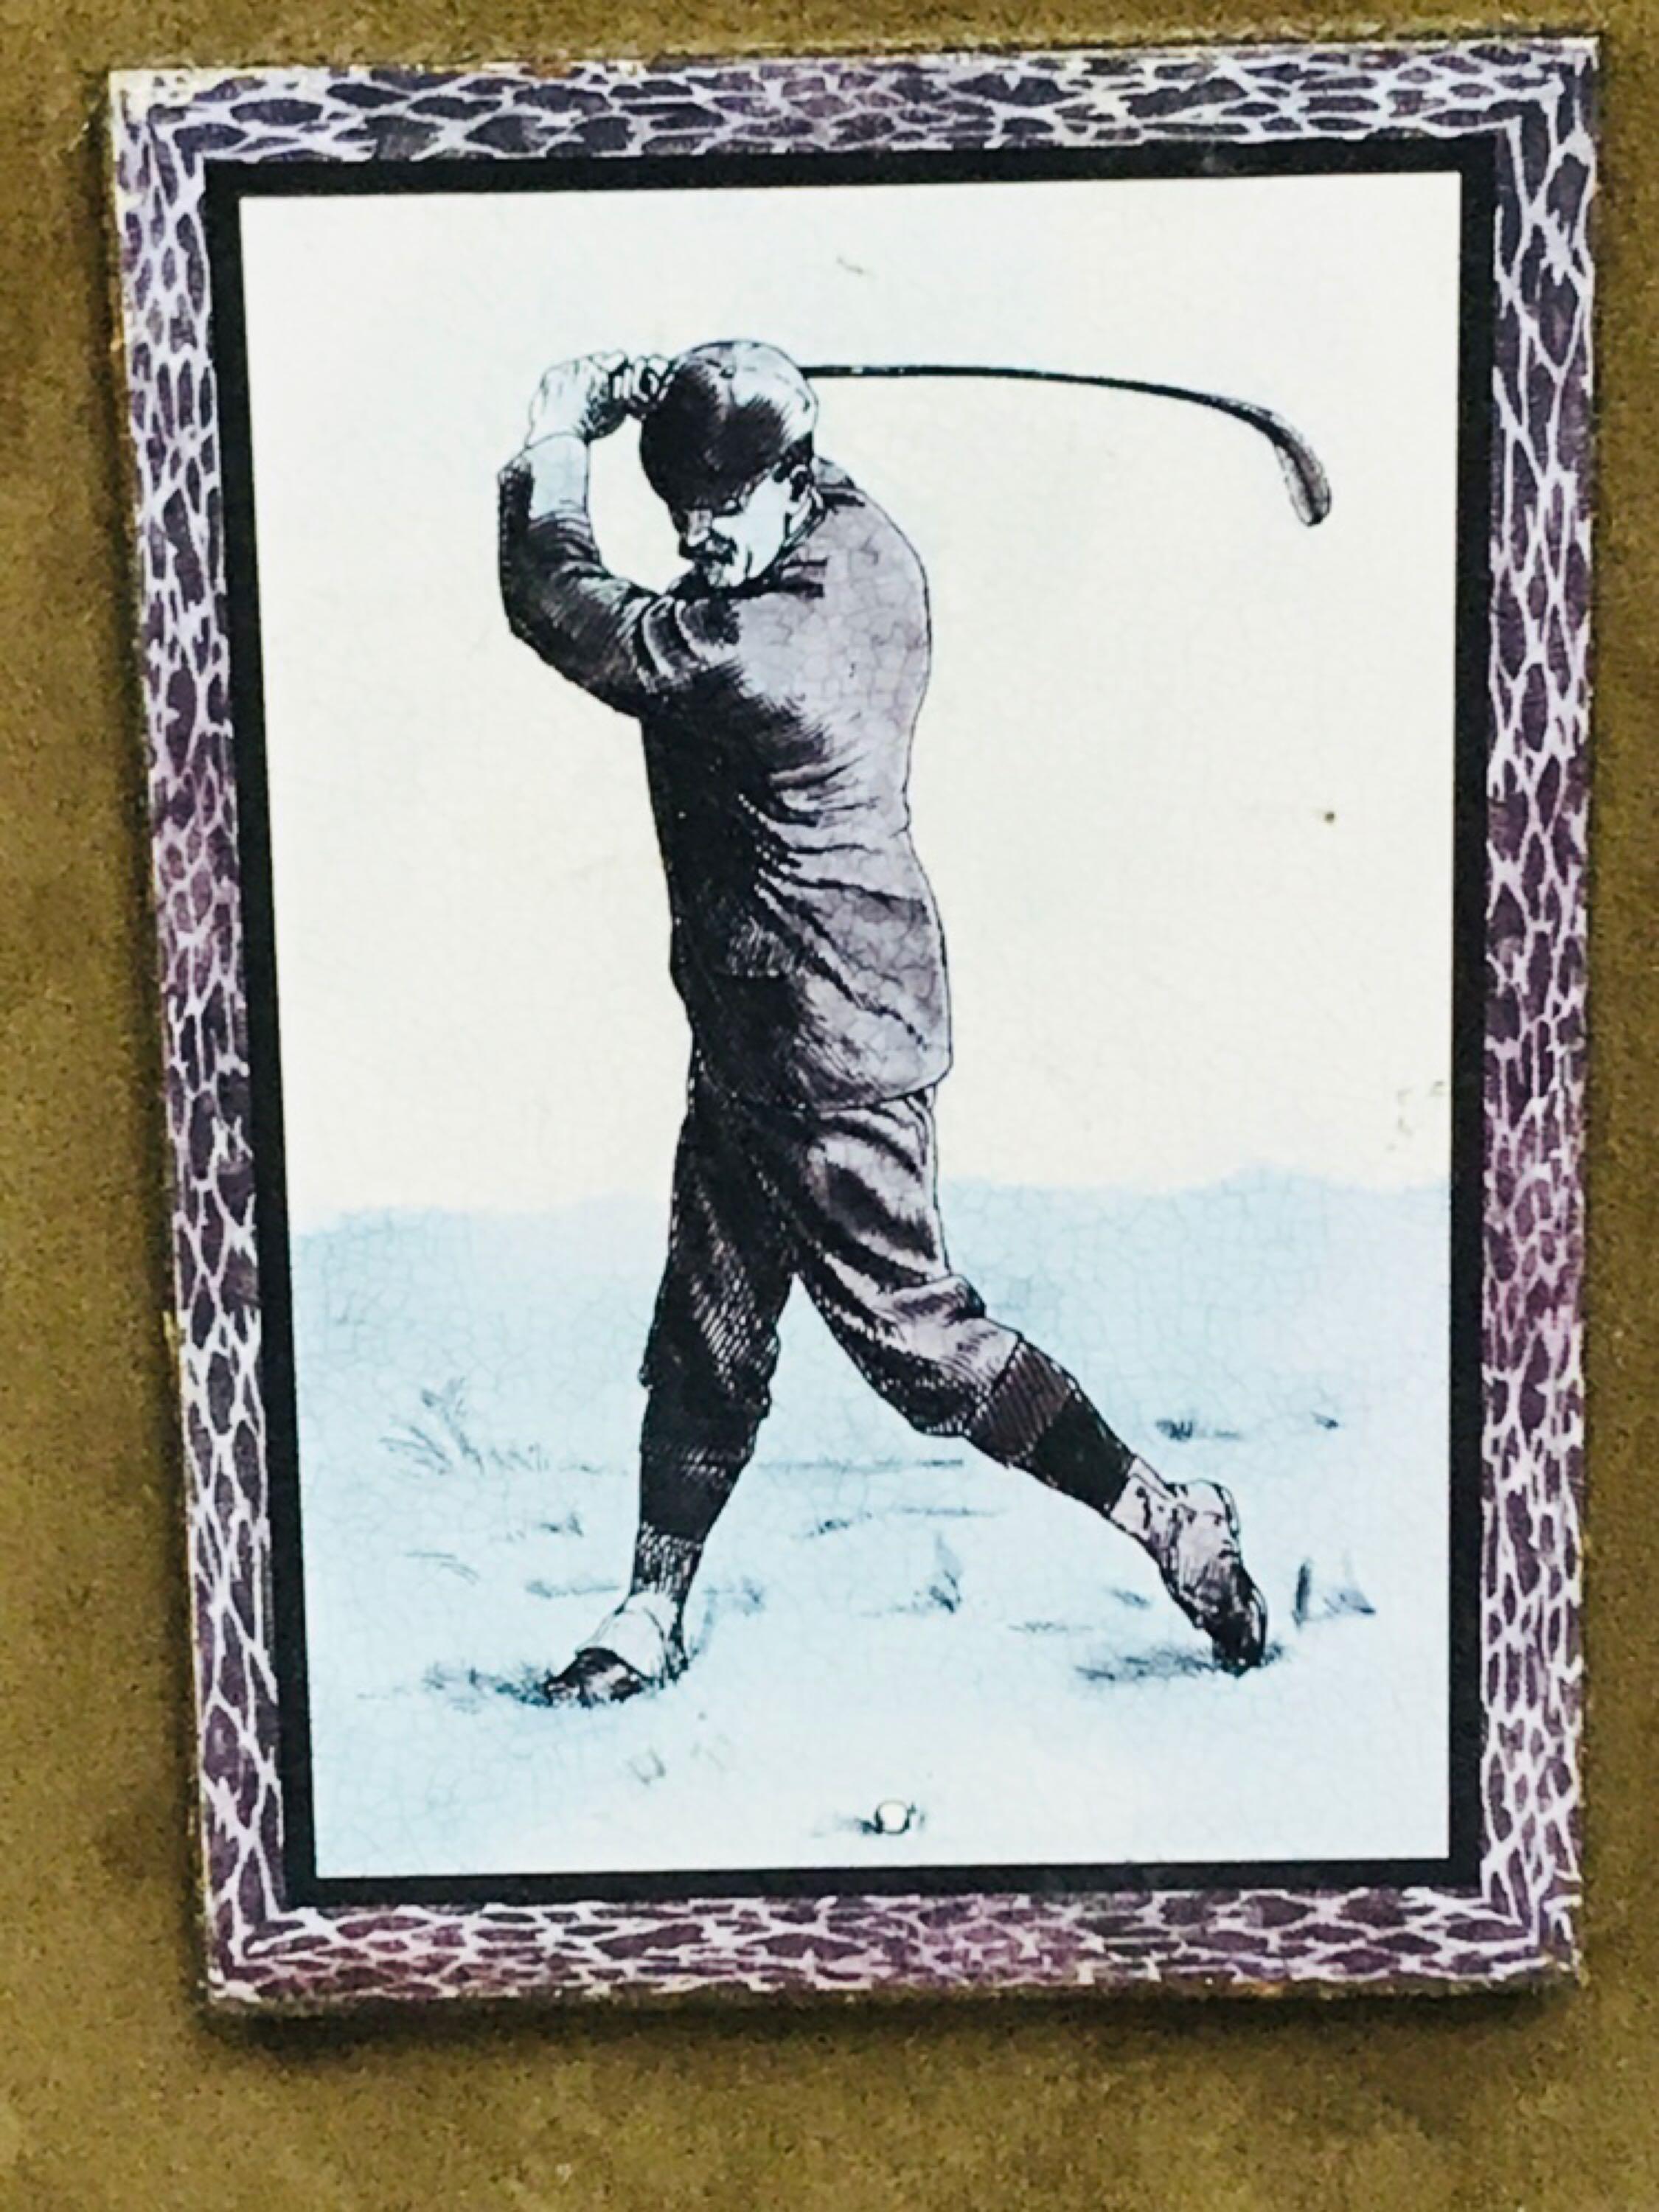 Set of Four Golf Pictures, Mounted on Suede